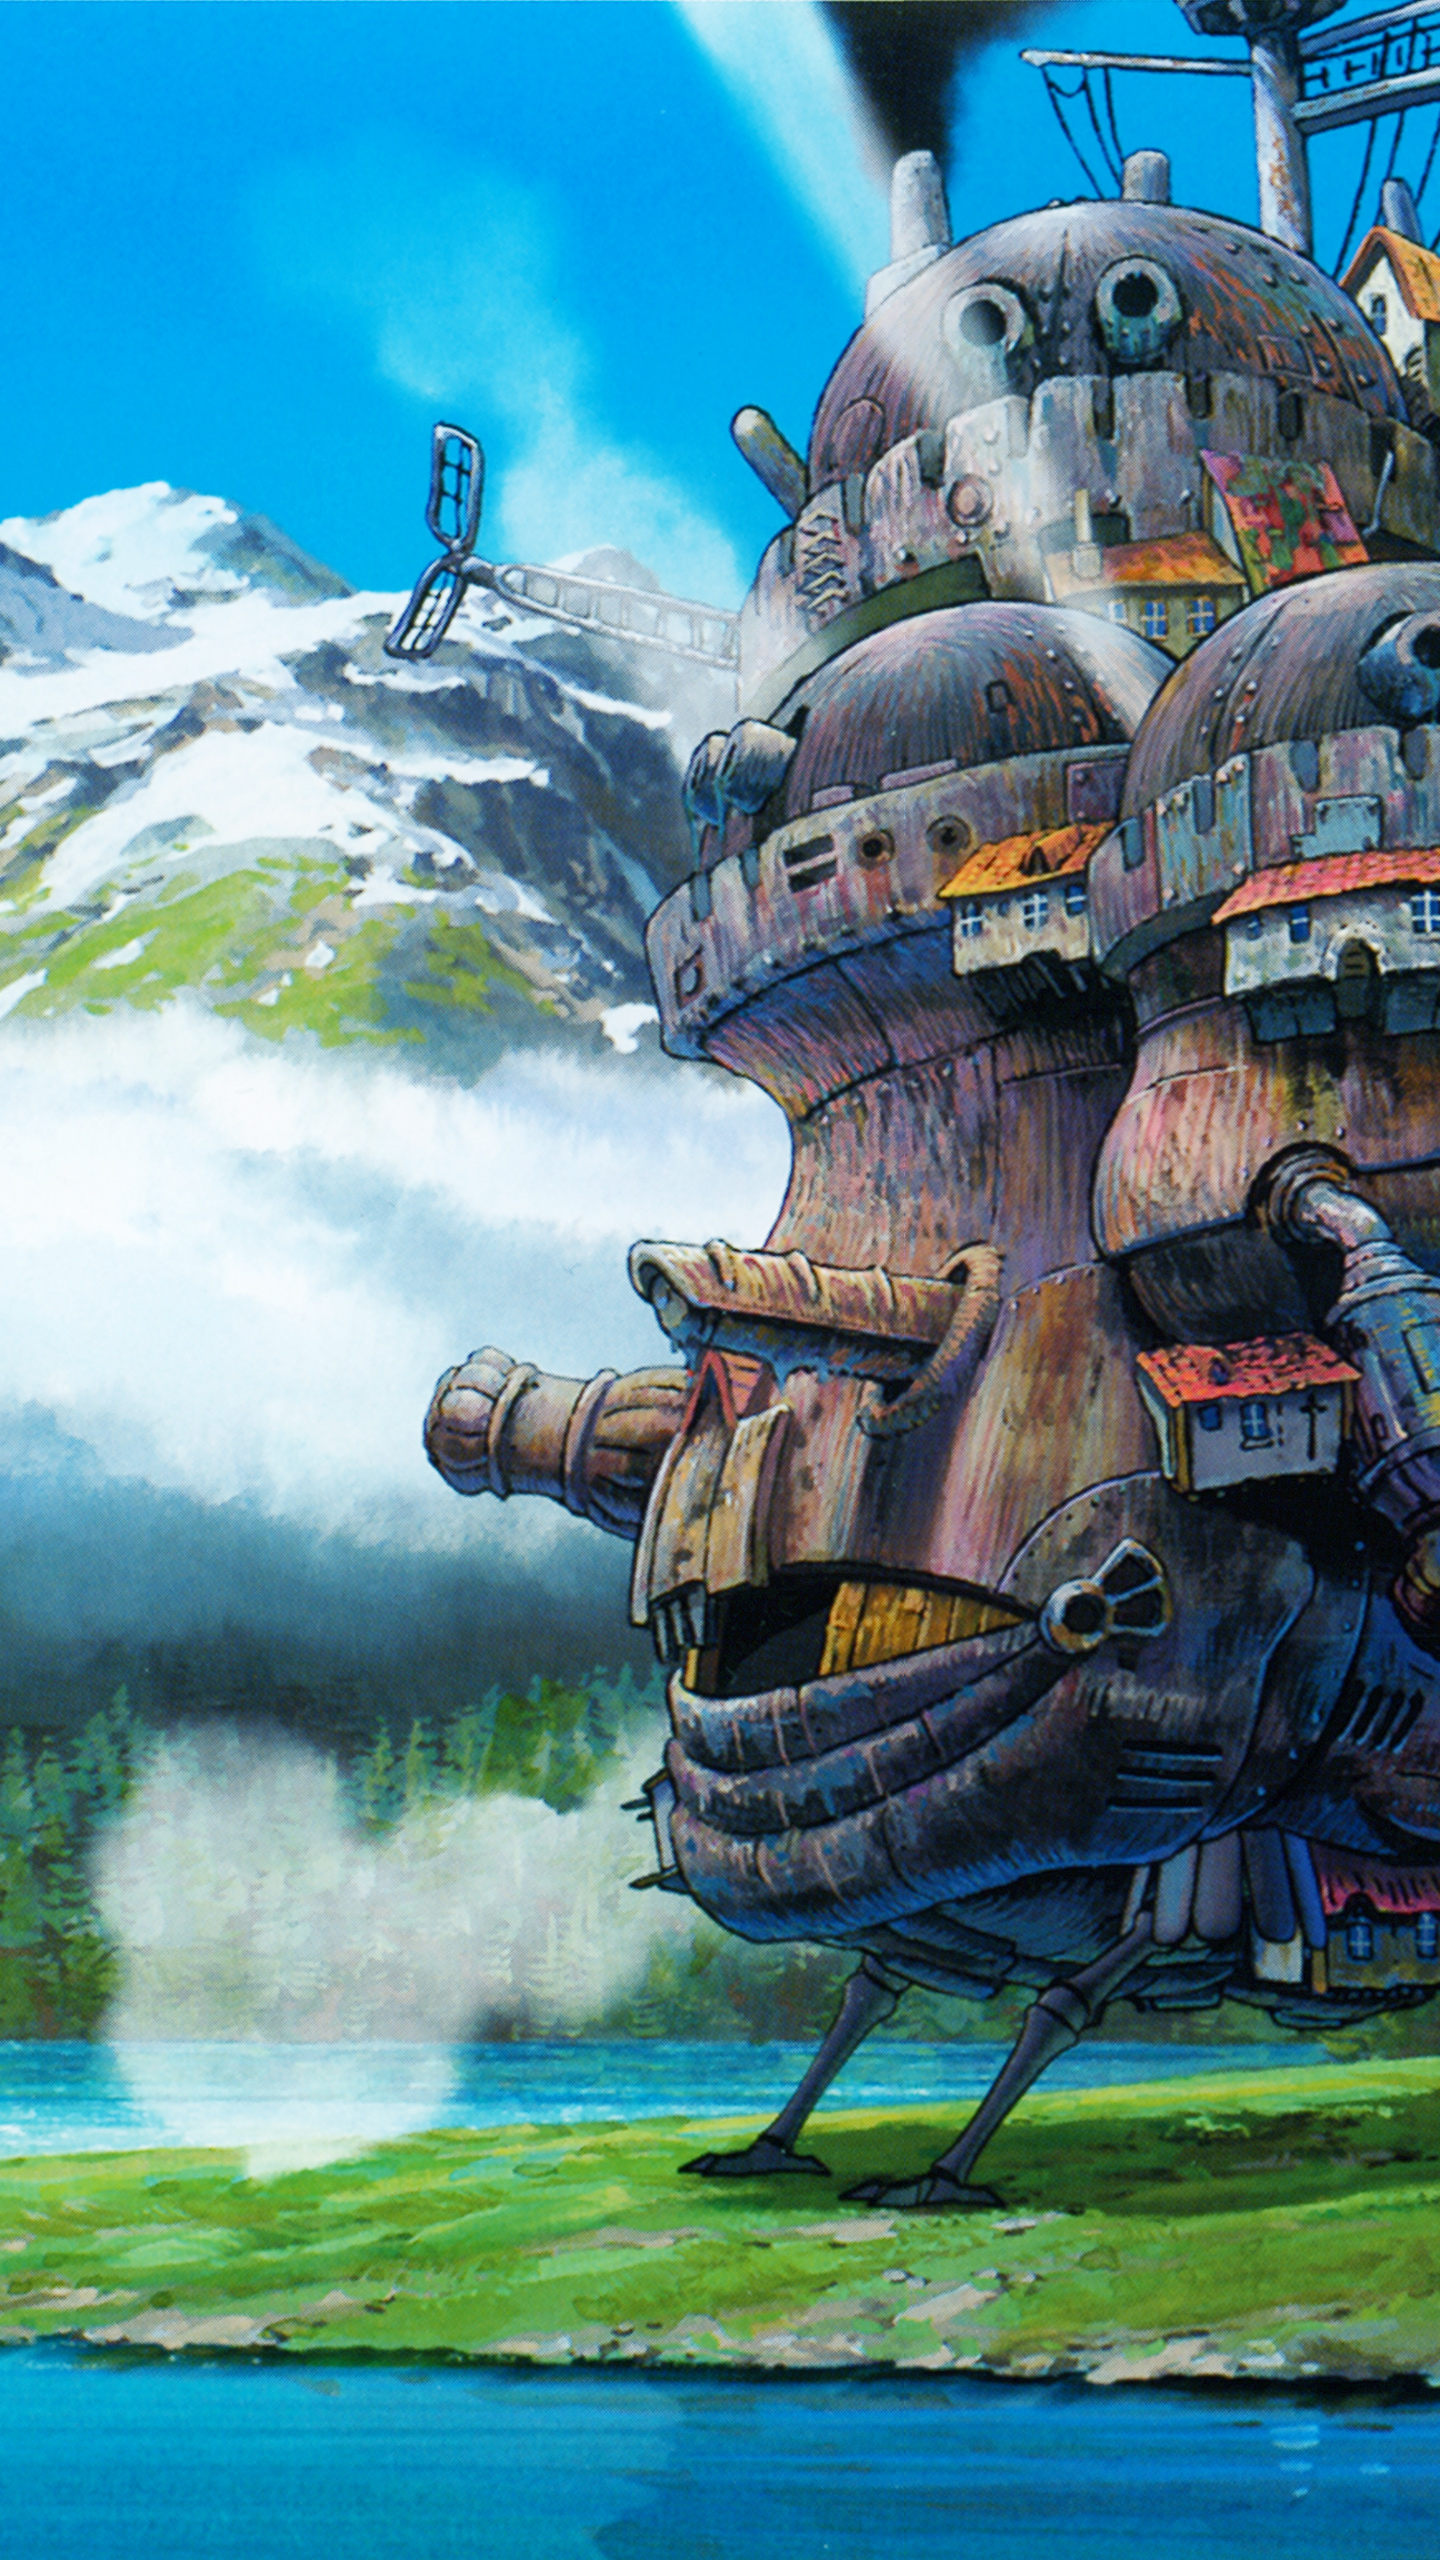 howl's moving castle wallpaper,painting,games,fiction,vehicle,illustration